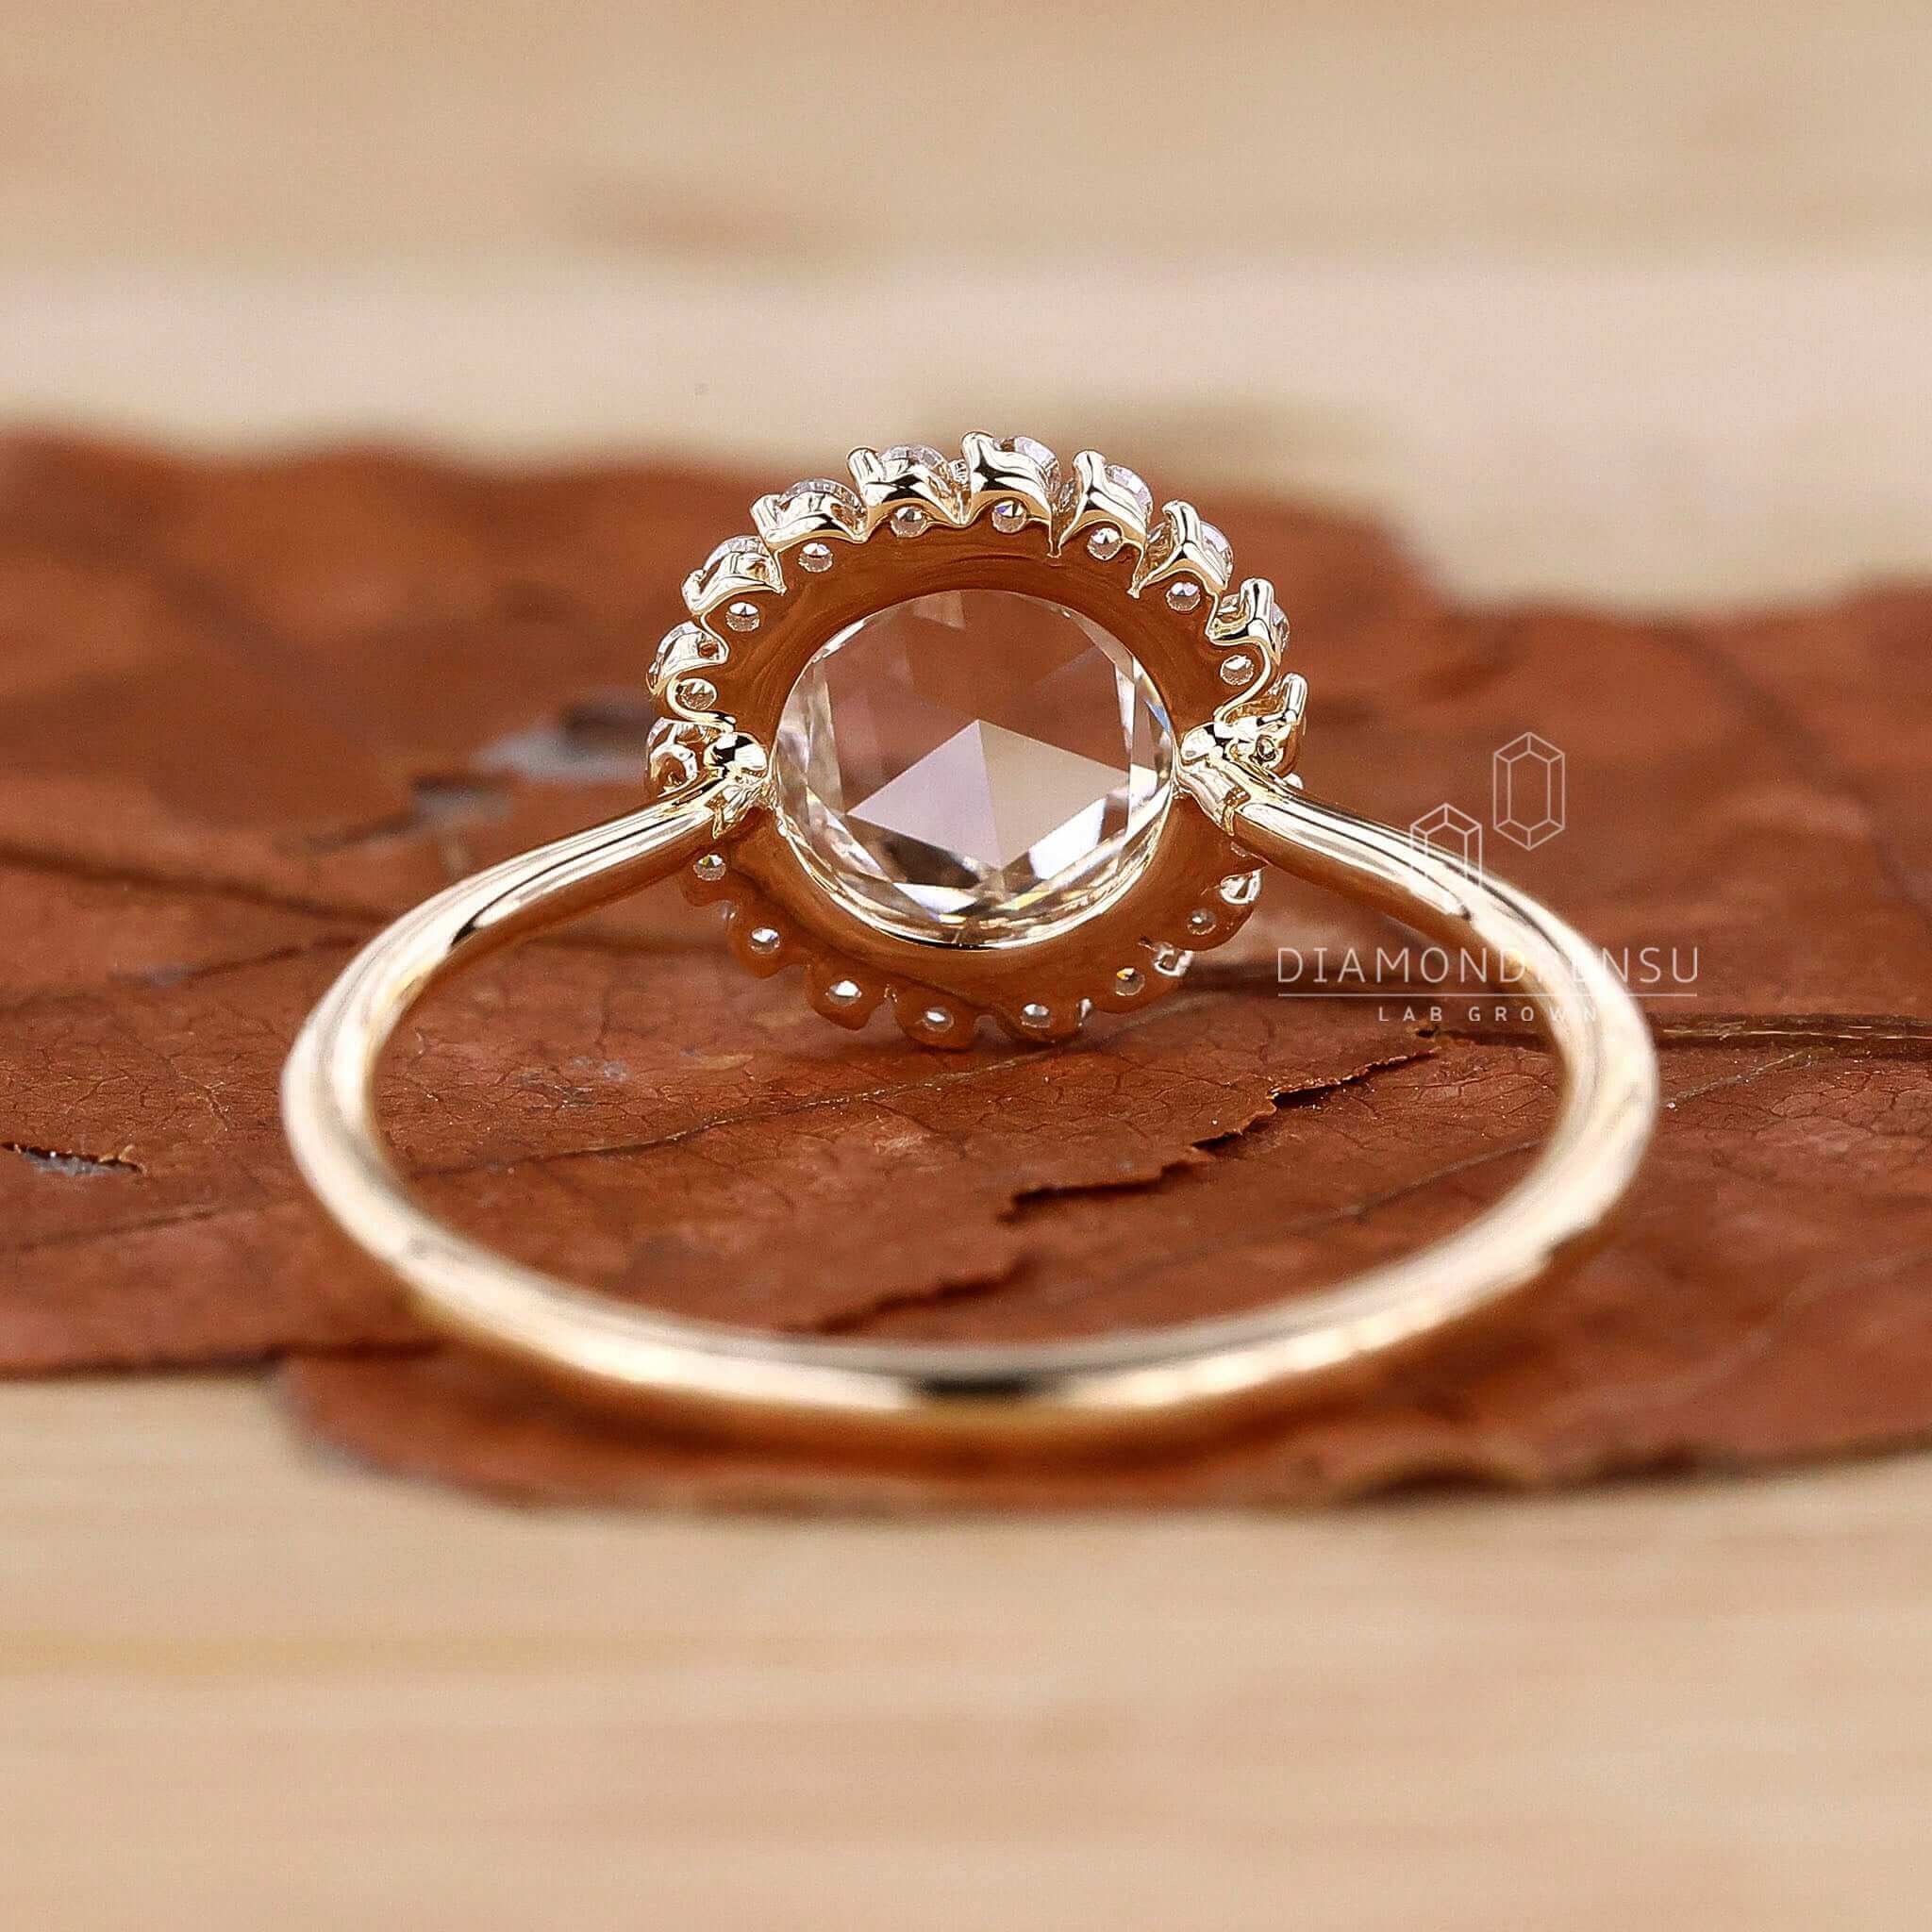 vintage style ring